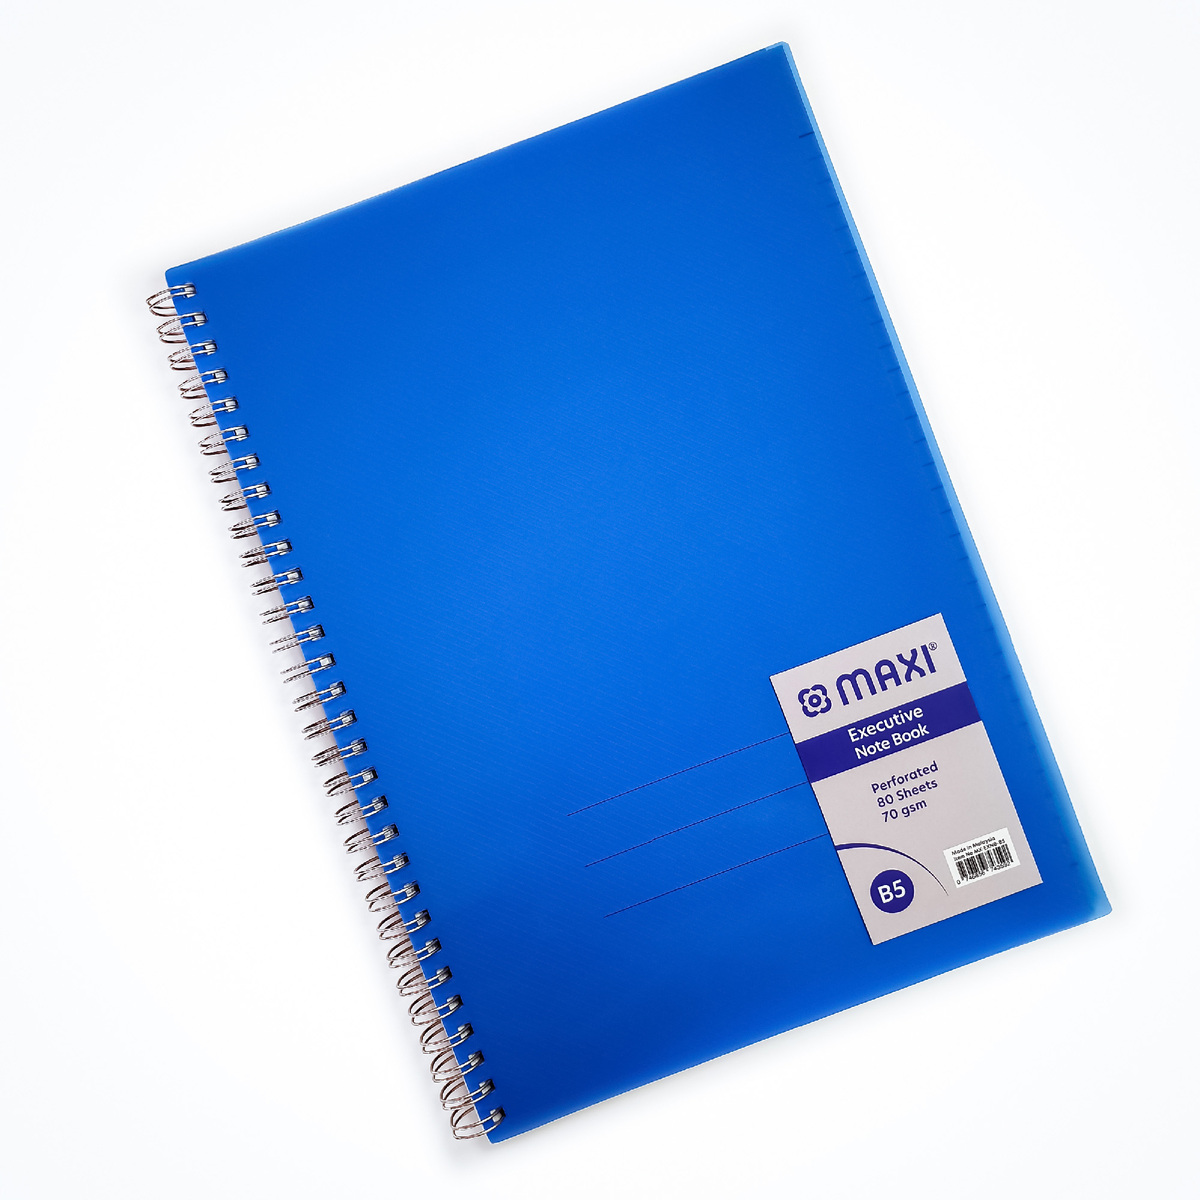 Maxi wire-o-colored polypropylene notebook B5 Siez, 80 sheets, MX-EXNB-B5